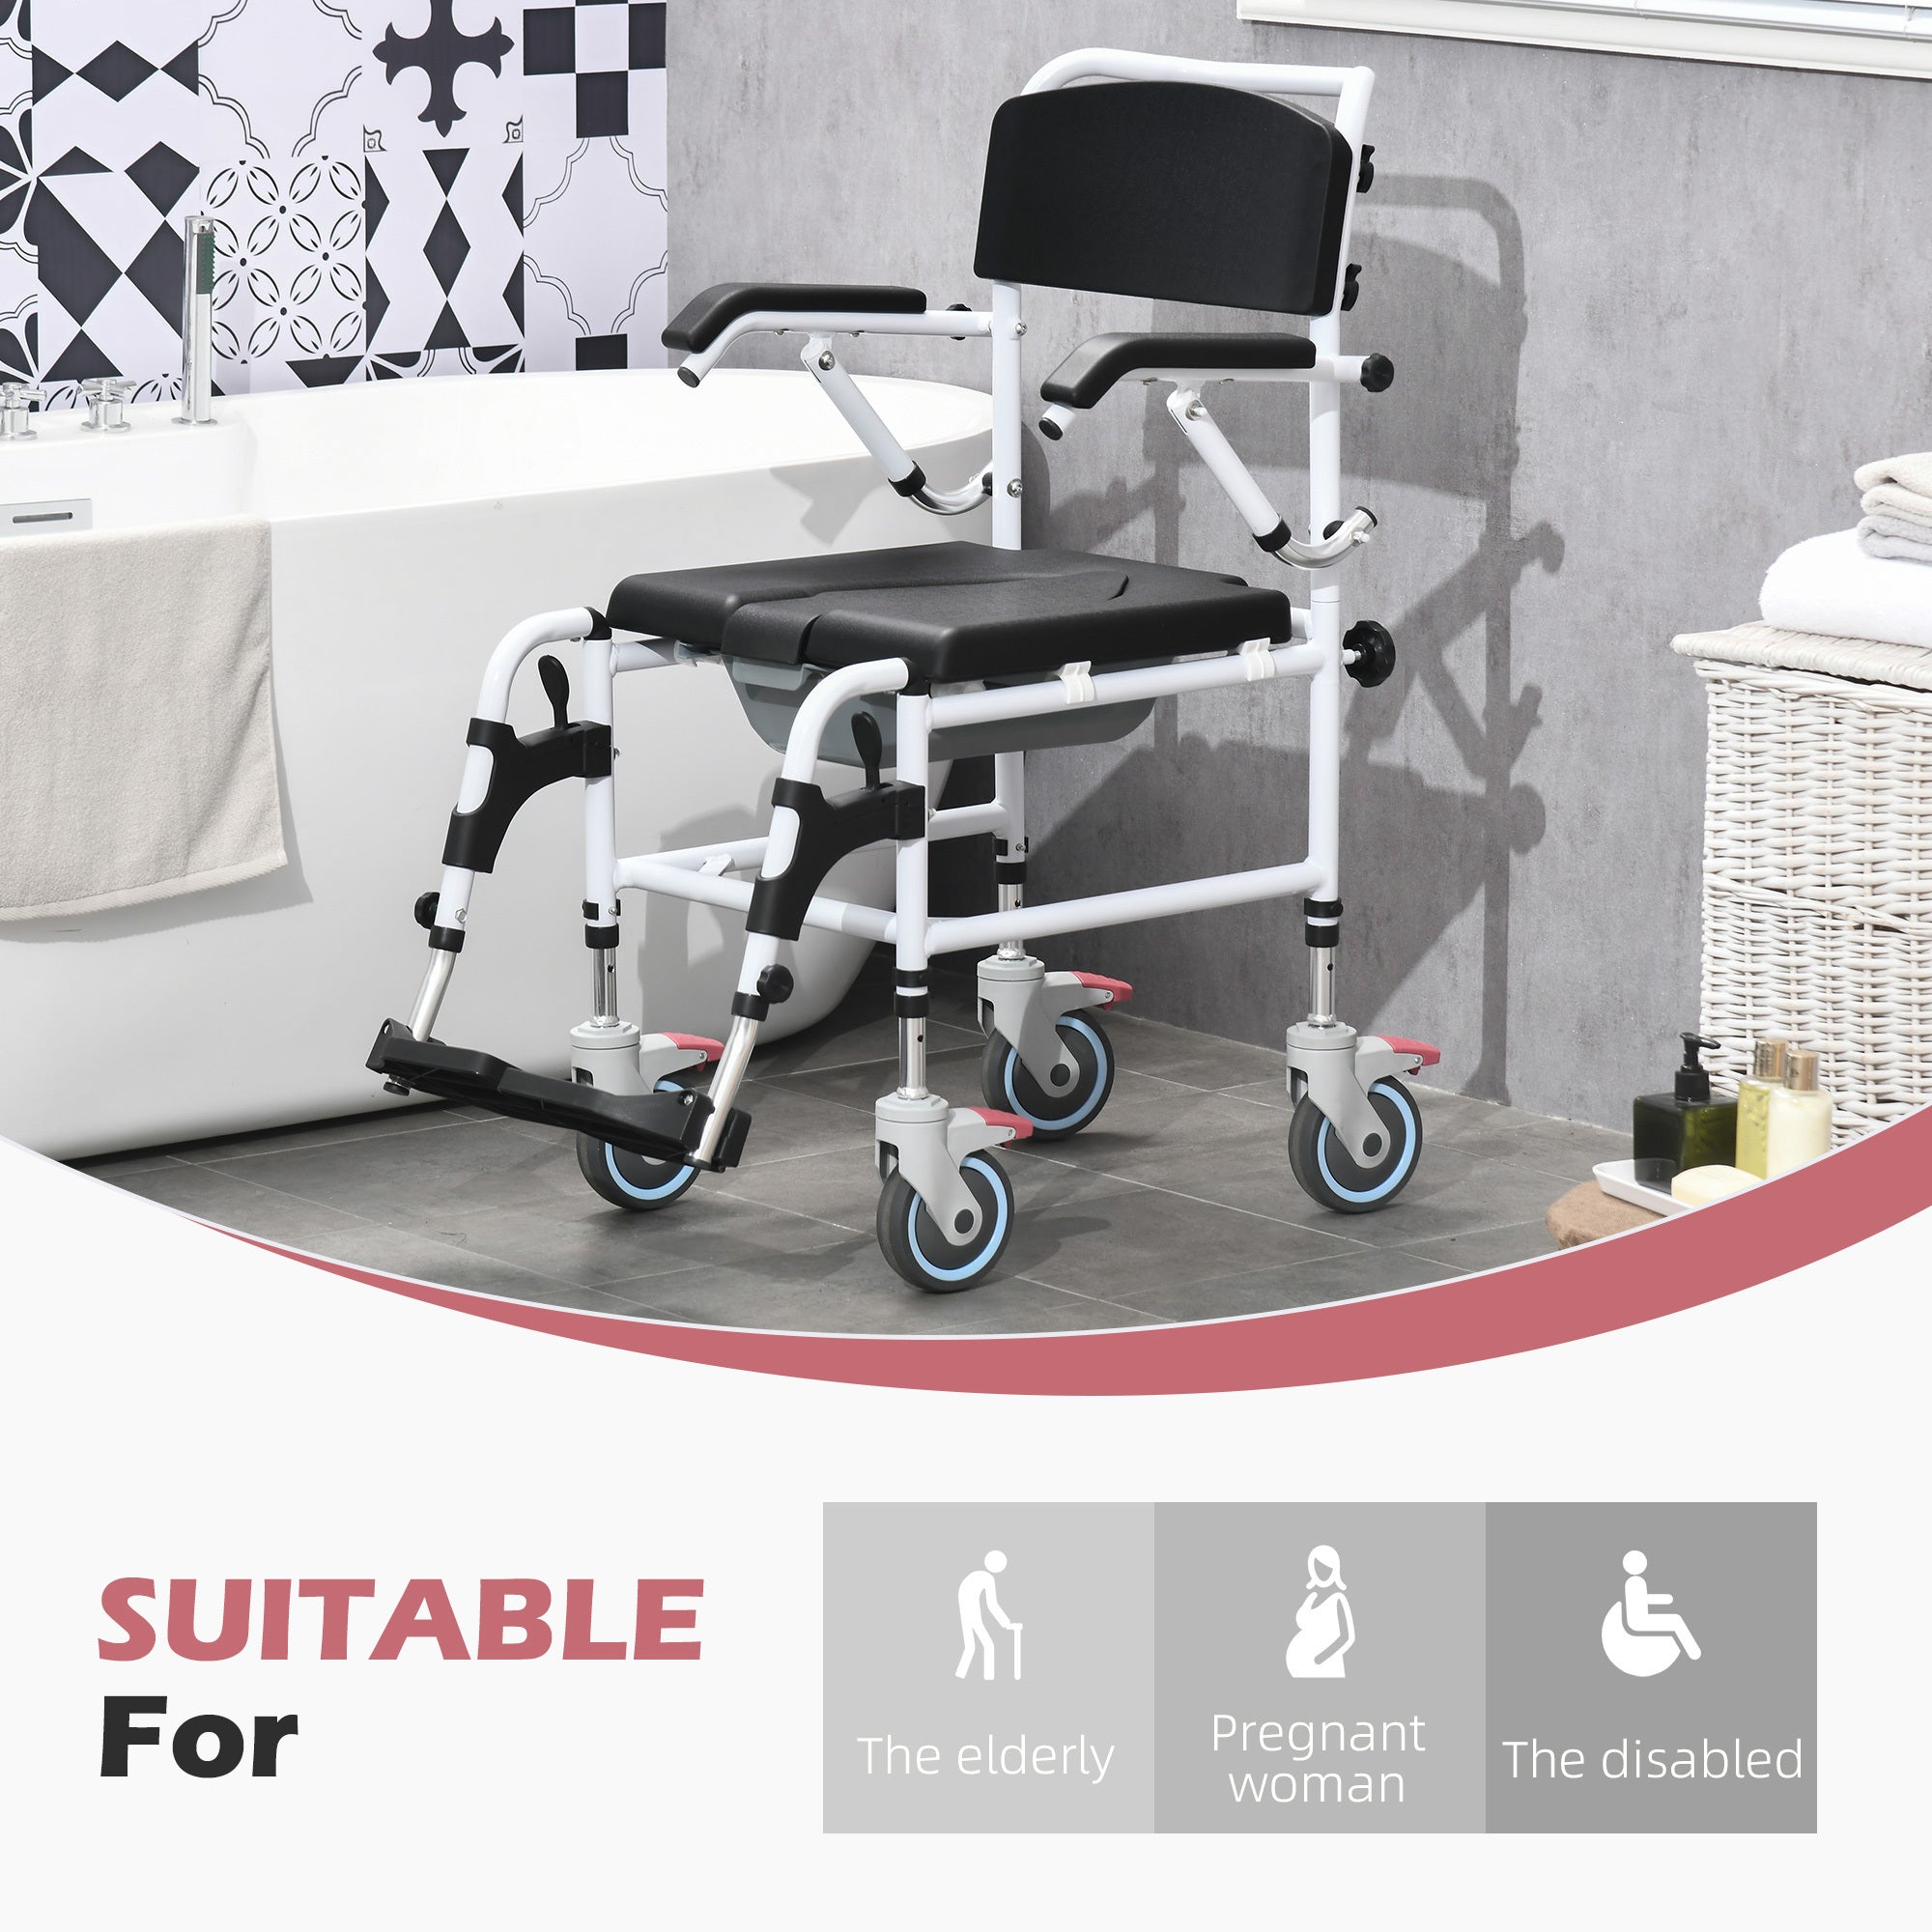 Accessibility Commode Wheelchair, Rolling Shower black-pu leather